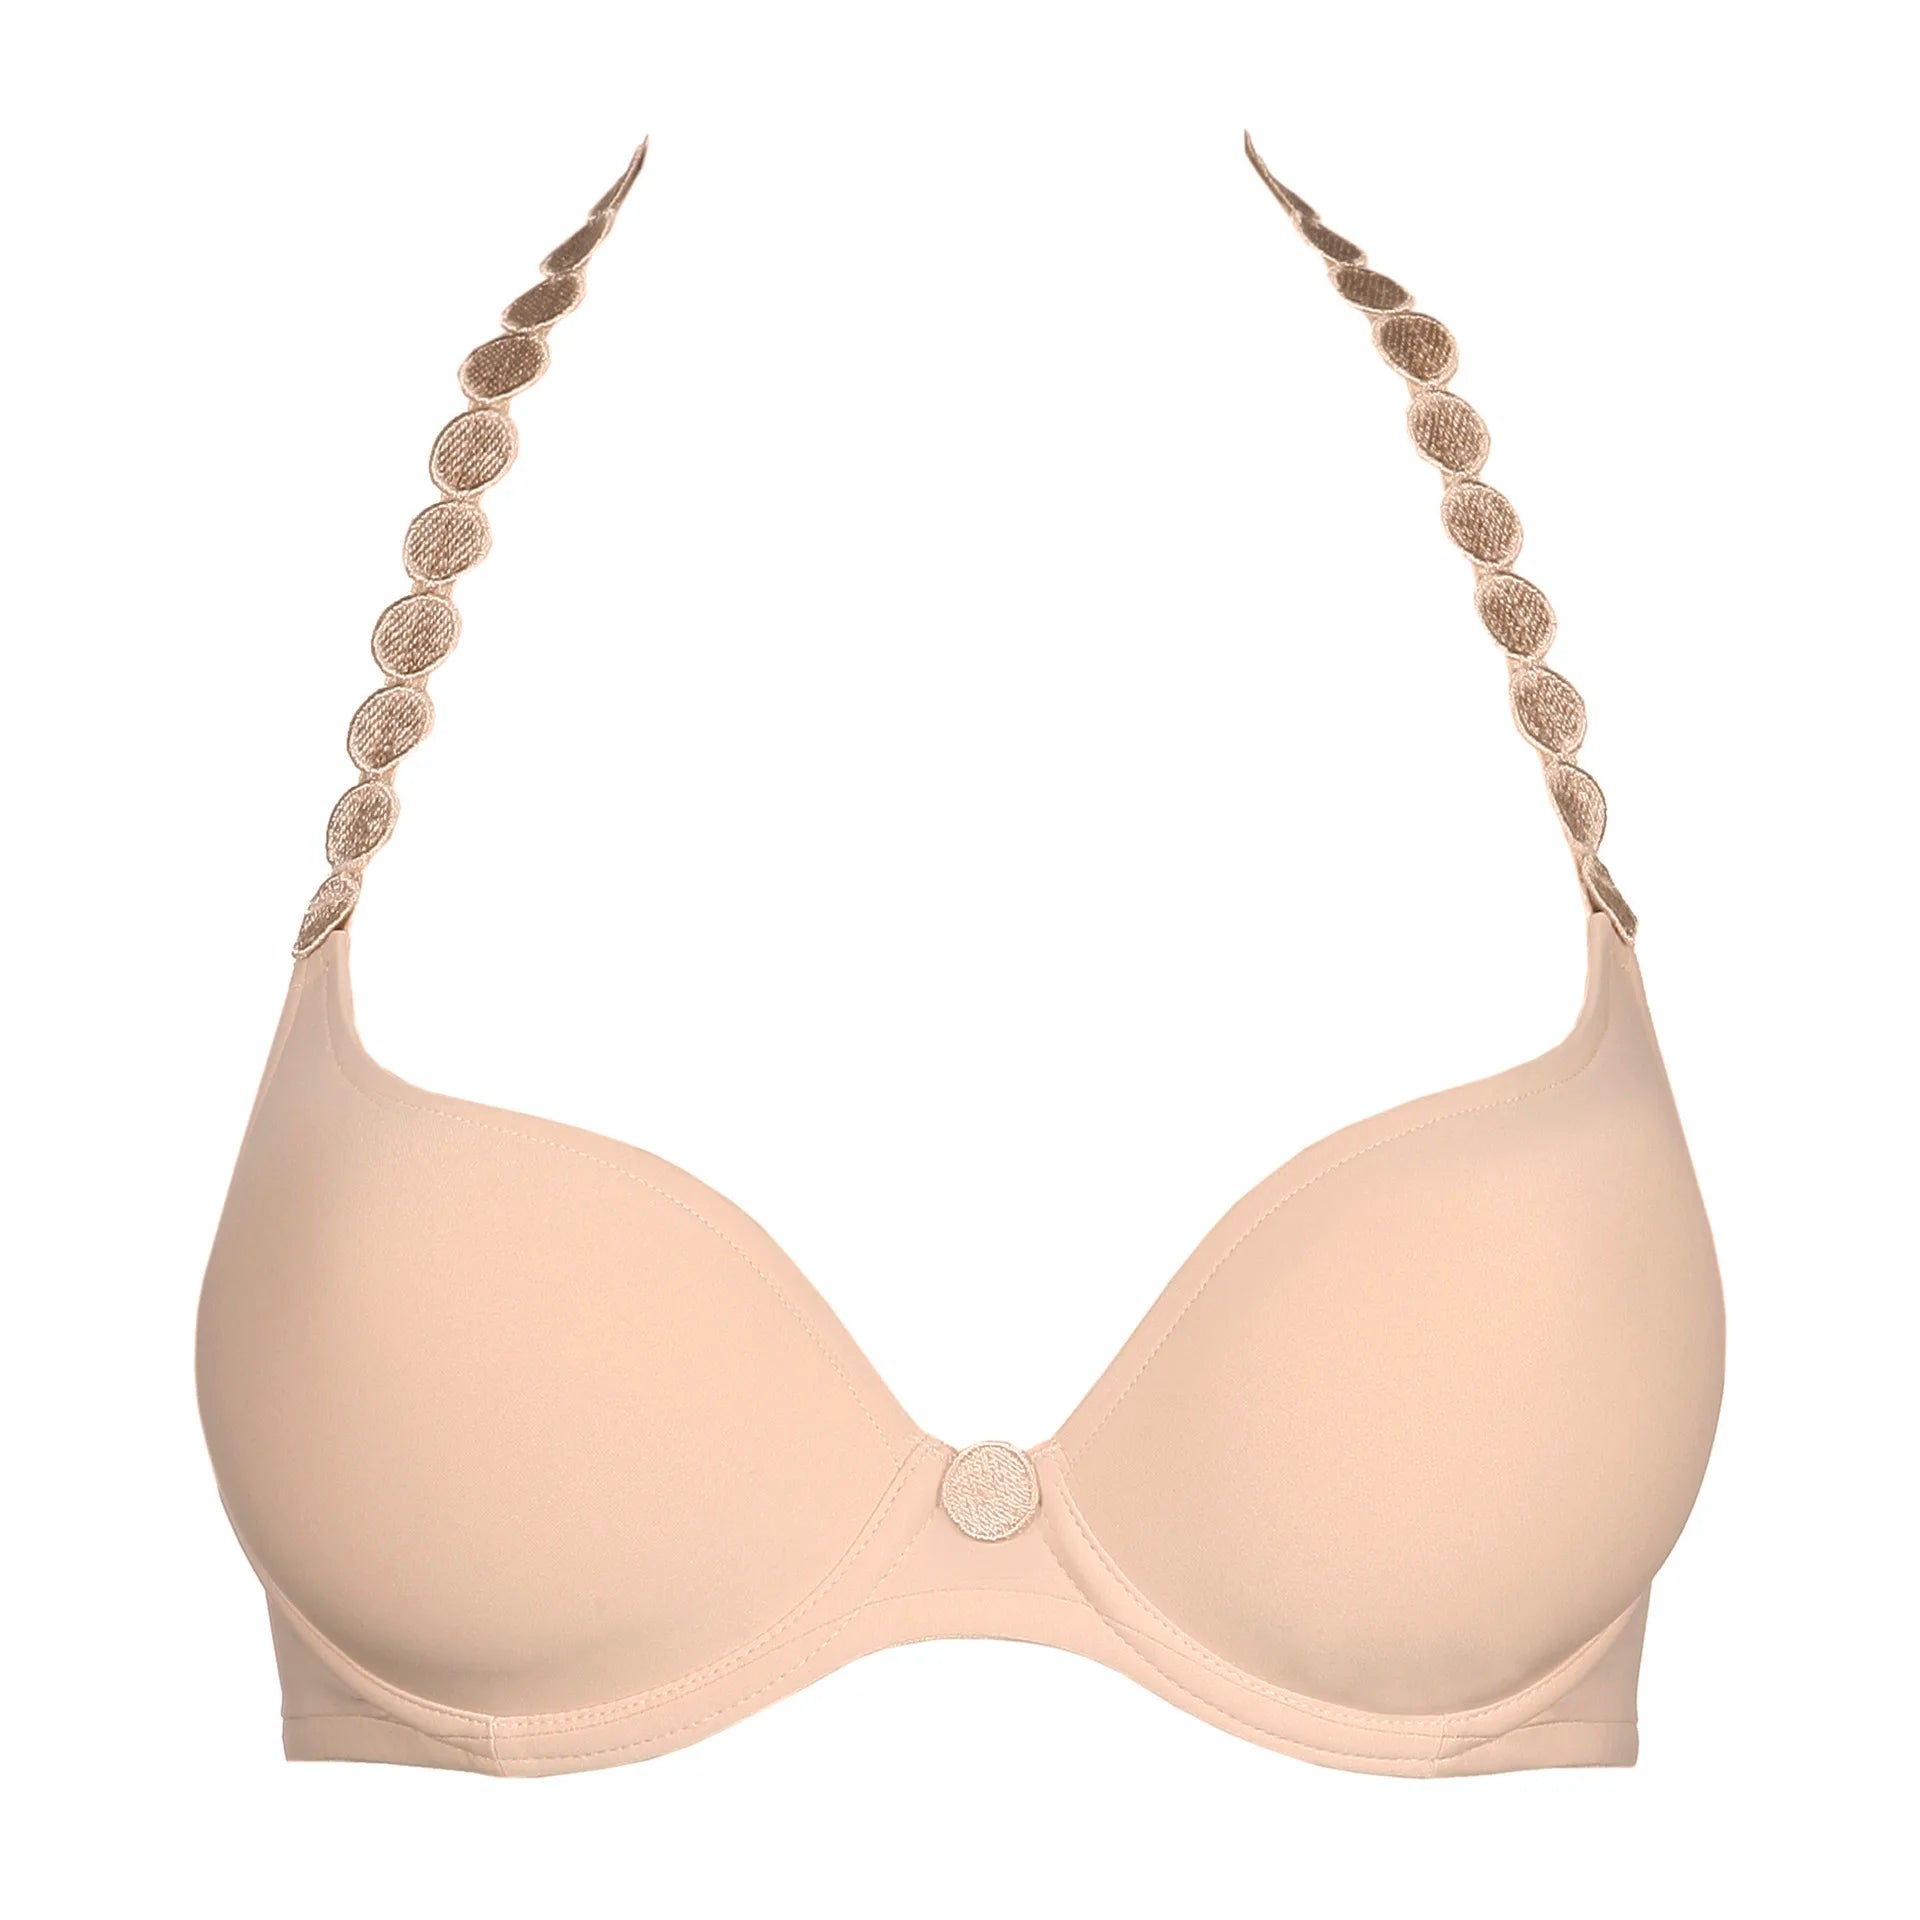 Come In to Try the Tom Heart Shape Bra by Marie Jo Today